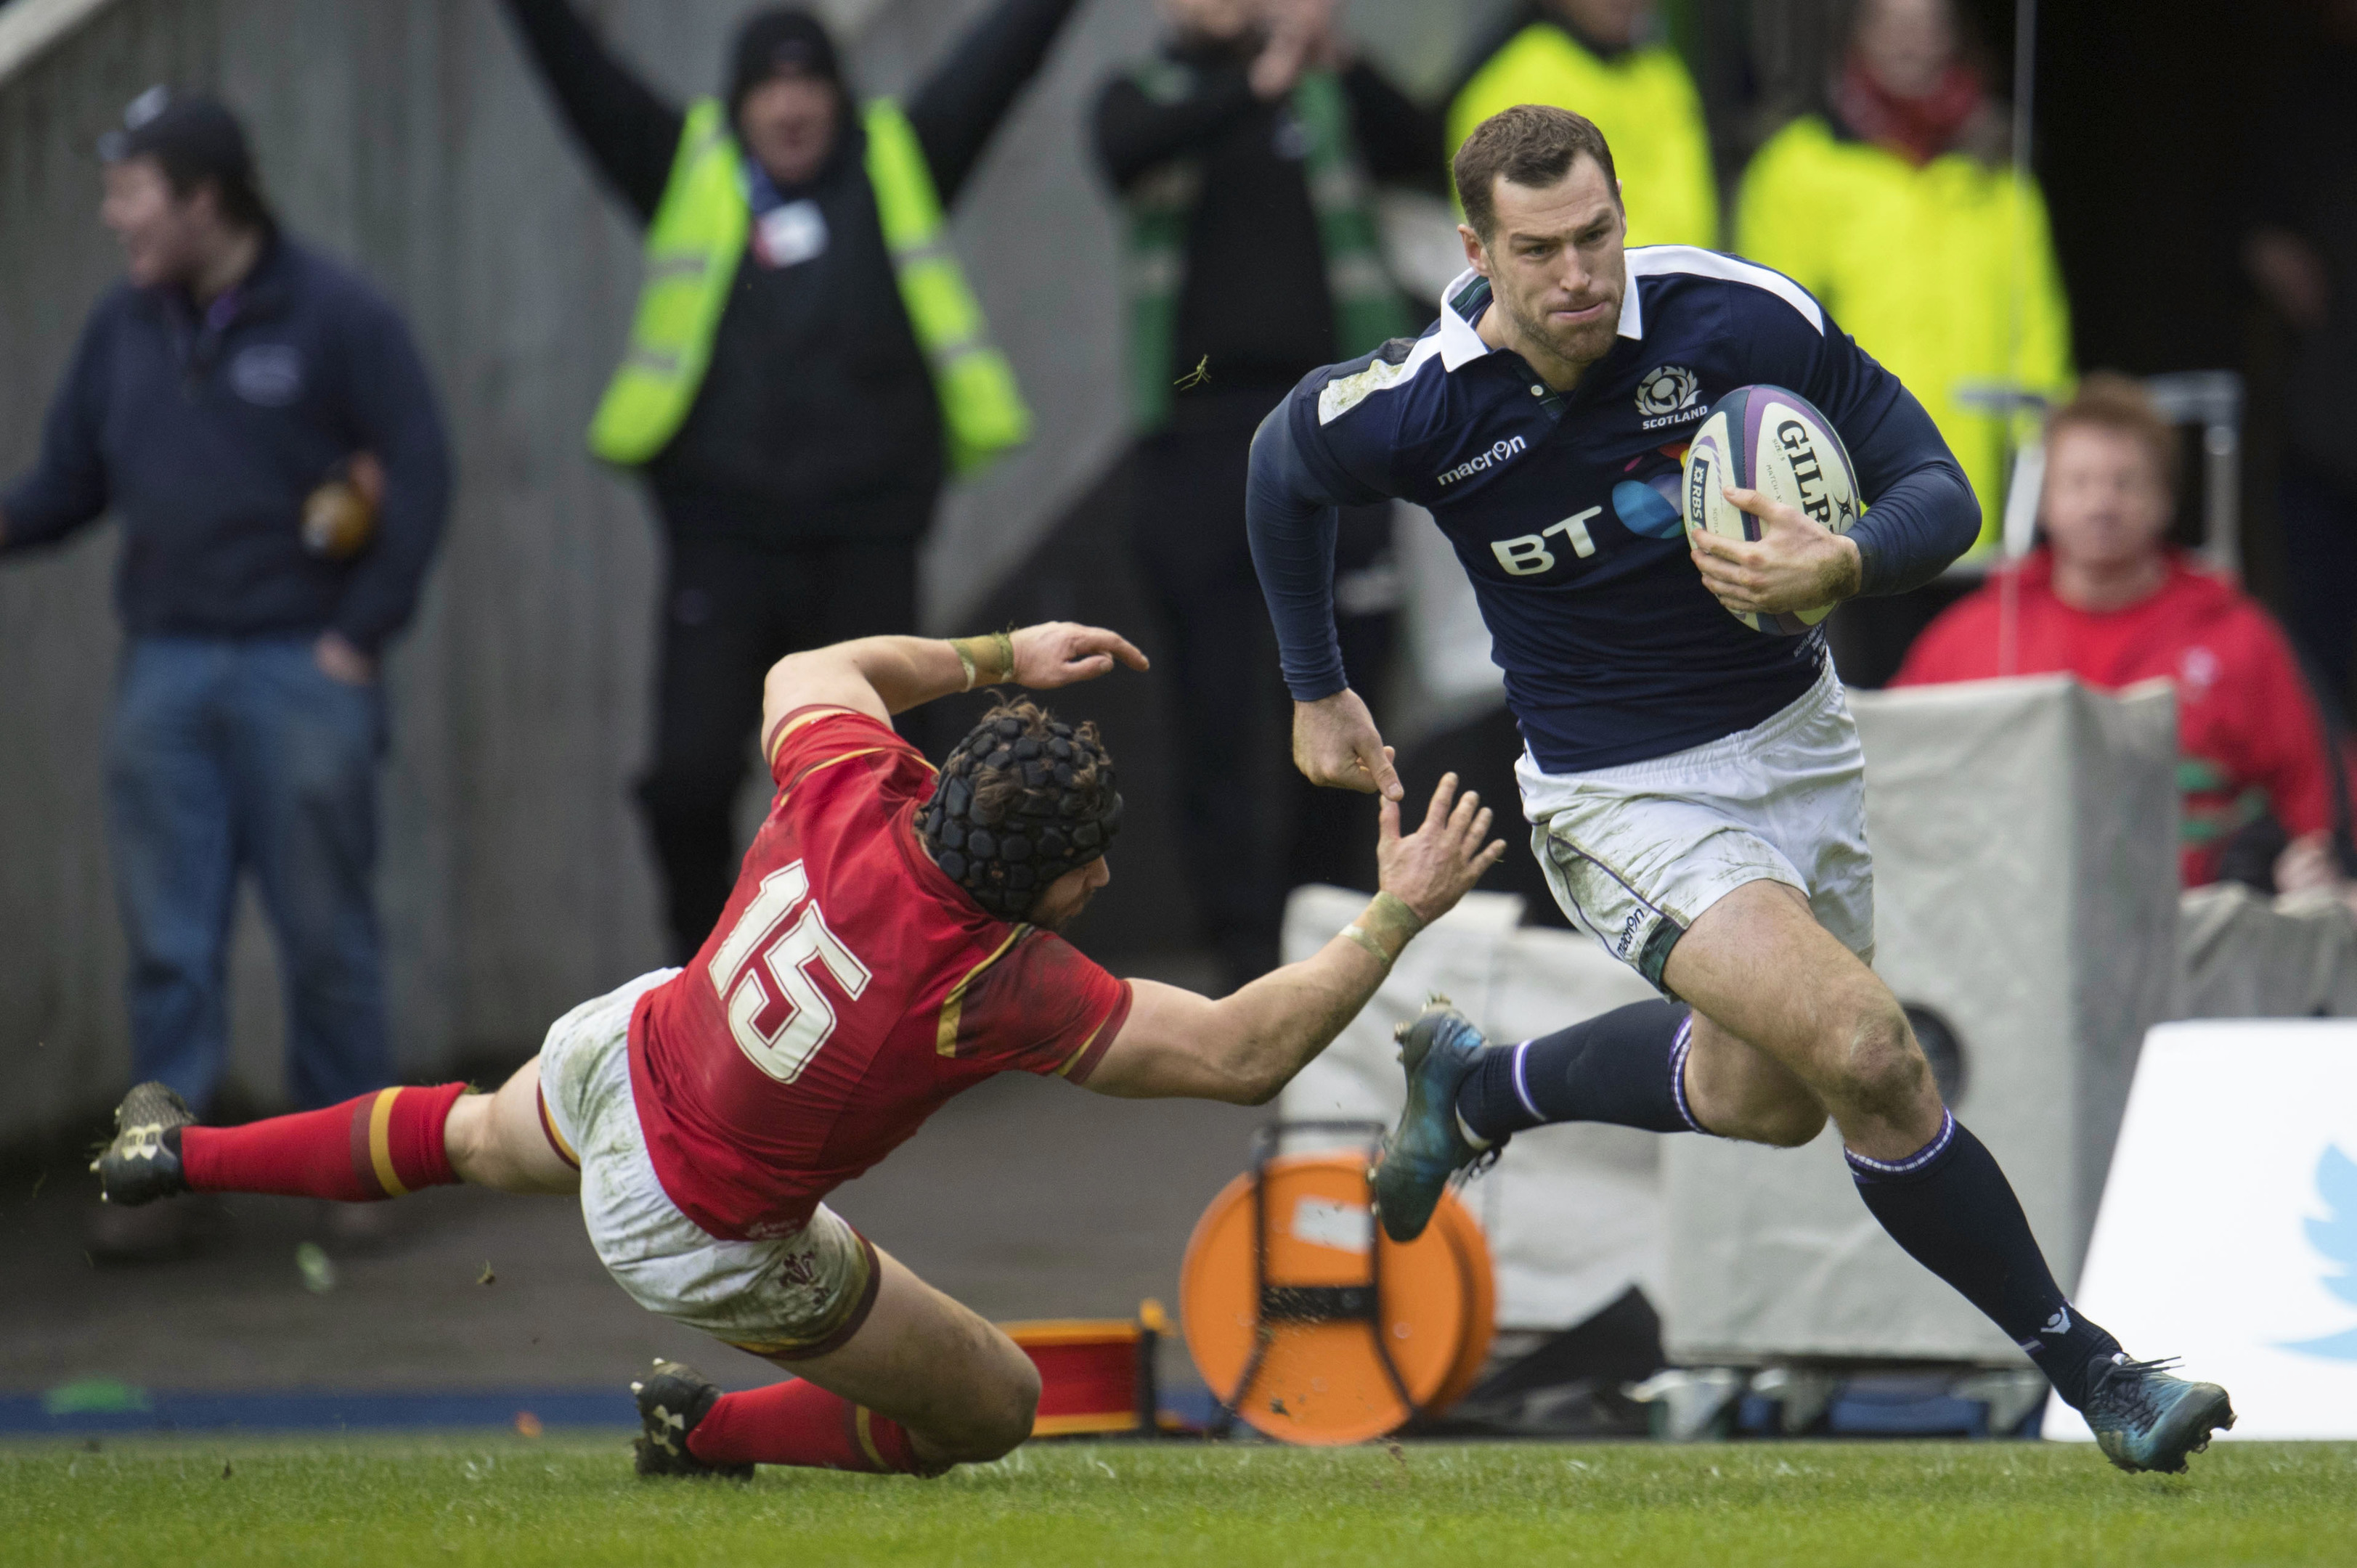 Tim Visser runs through to score the second try for Scotland against Wales.